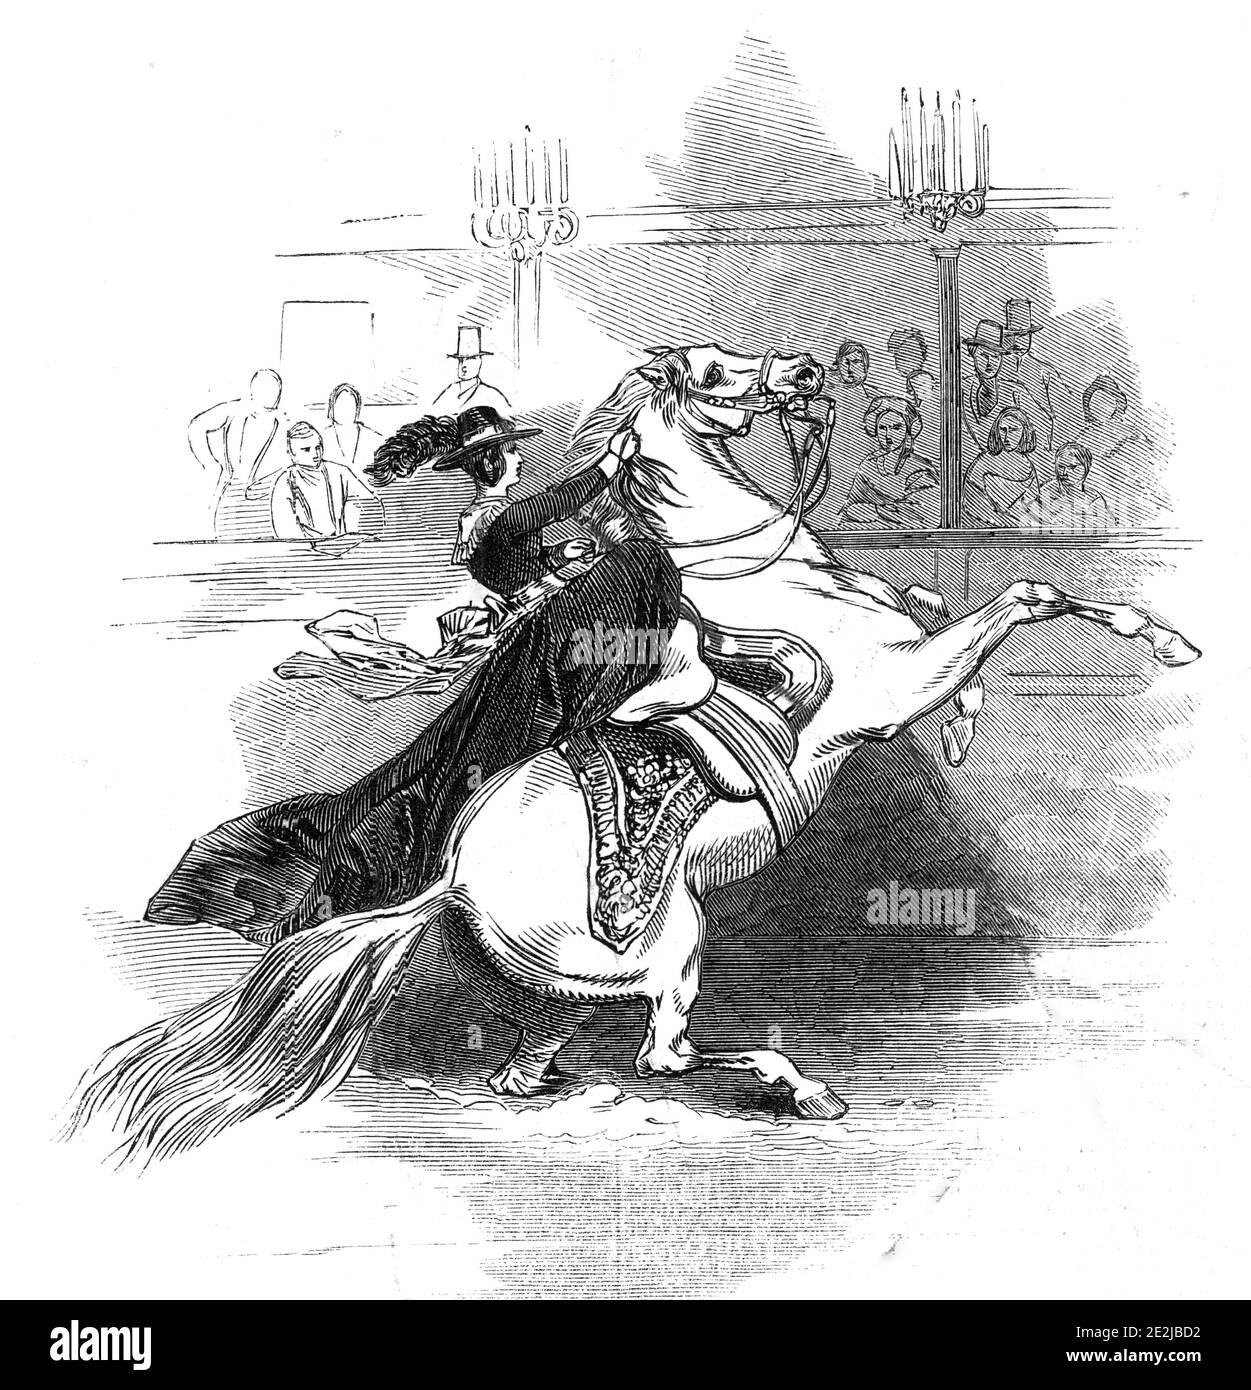 Astley's - scene in the Circle, 1845. Show at Astley's Amphitheatre in London, featuring '...Madame Klatt, the very clever female equestrian, of whose daring performances we have more than once had occasion to speak in noticing the equitation at this theatre. She is represented in one of her most effective feats, which is always greeted with rounds of loud applause - causing her milk-white charger to rear up until he almost appears to be in danger of falling back upon his intrepid rider'. From &quot;Illustrated London News&quot;, 1845, Vol VII. Stock Photo